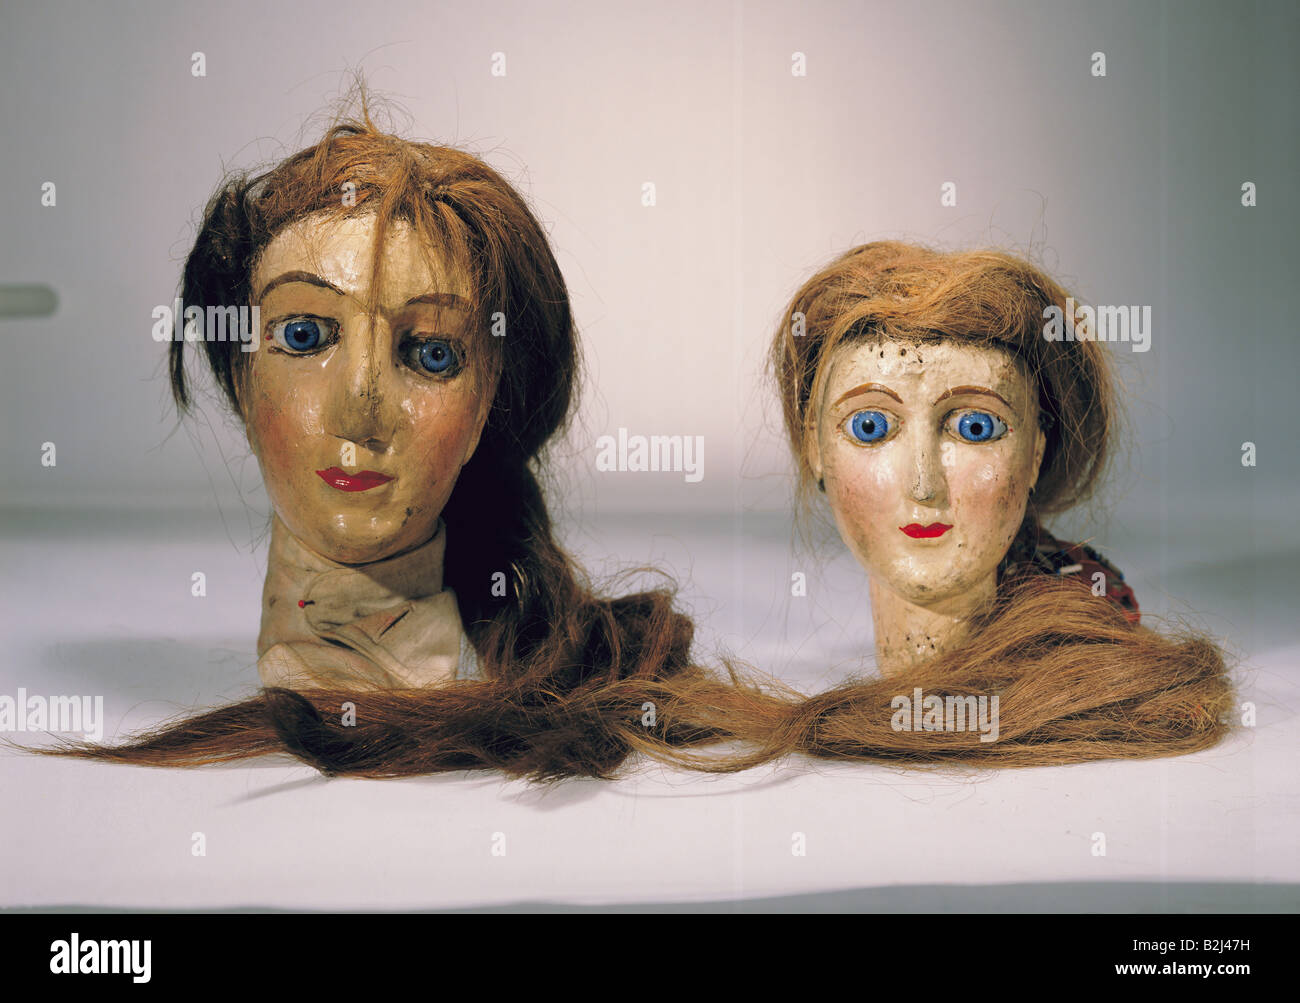 theatre, puppet theatre, marionettes, female heads, South Germany, 19th century, Stadtmuseum, Munich, figures, puppets, women, fine arts, handcraft, historic, historical, people, woman, Stock Photo